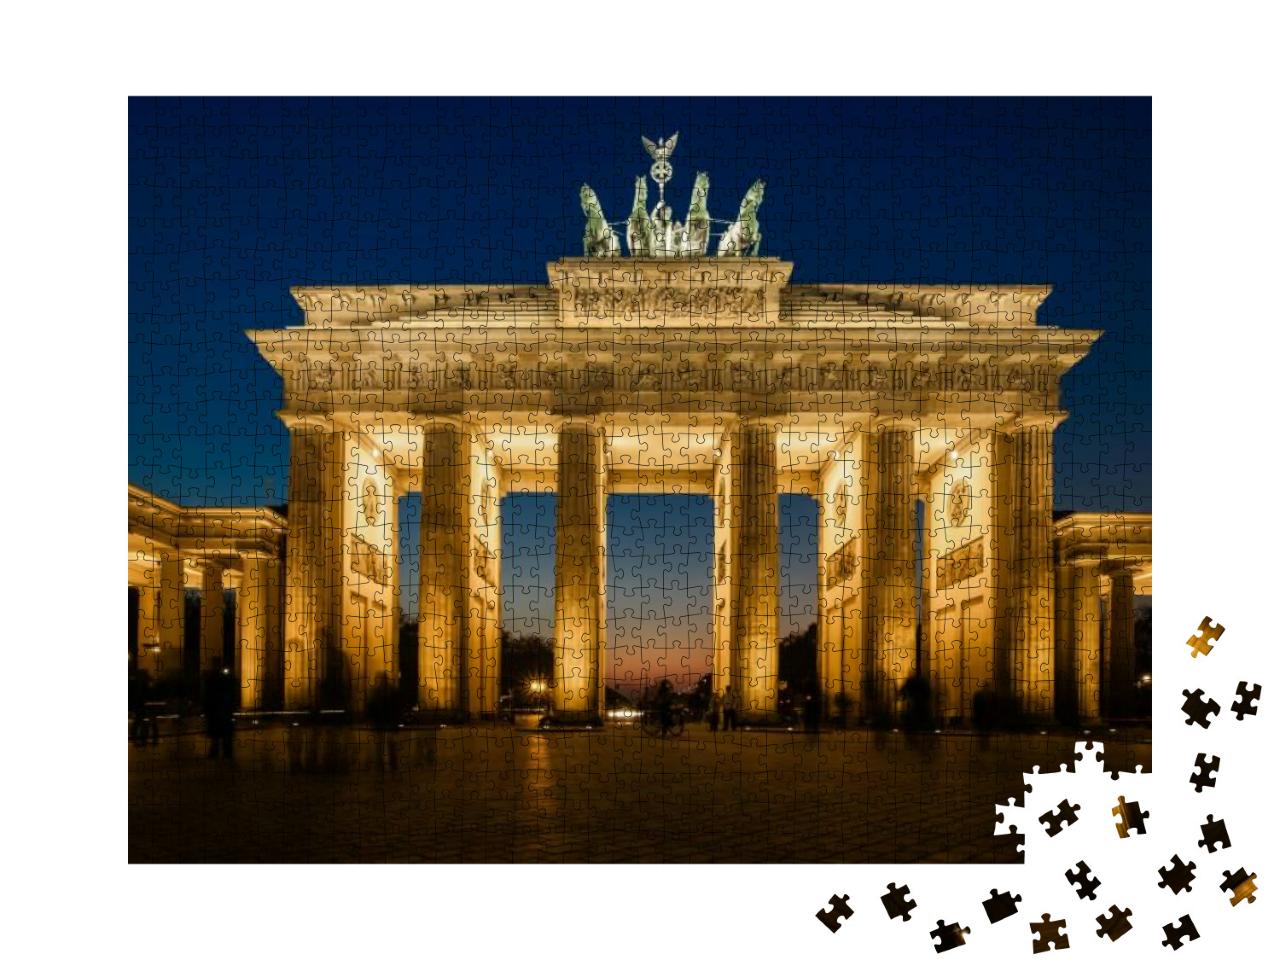 The Floodlit Brandenburg Gate in Berlin with a Few Fleeti... Jigsaw Puzzle with 1000 pieces